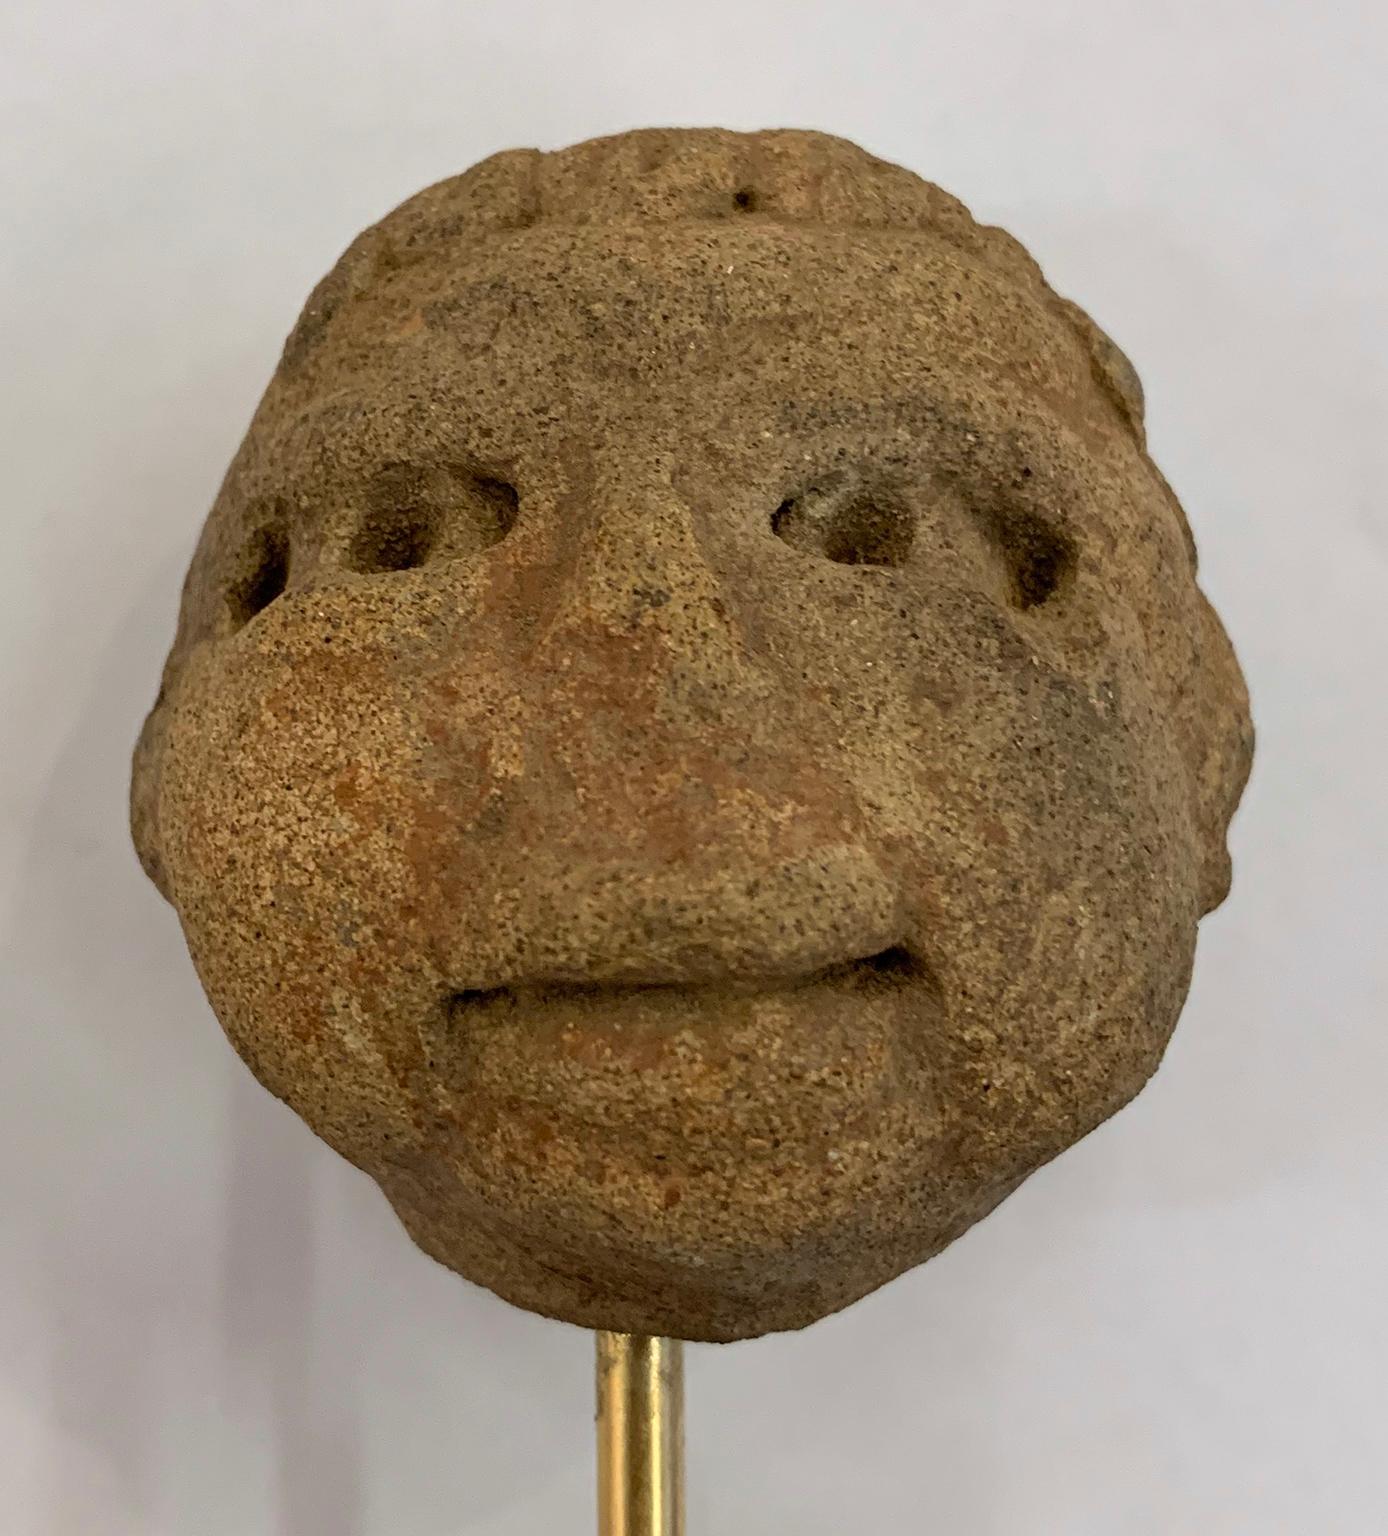 Pre Columbian Mesoamerica clay head, Veracruz Culture Approximatly 600 - 900 BCE.Variations of these figures are well represented within the antiquity collections of major institutions throughout Europe and the Americas.

The archaeological dating